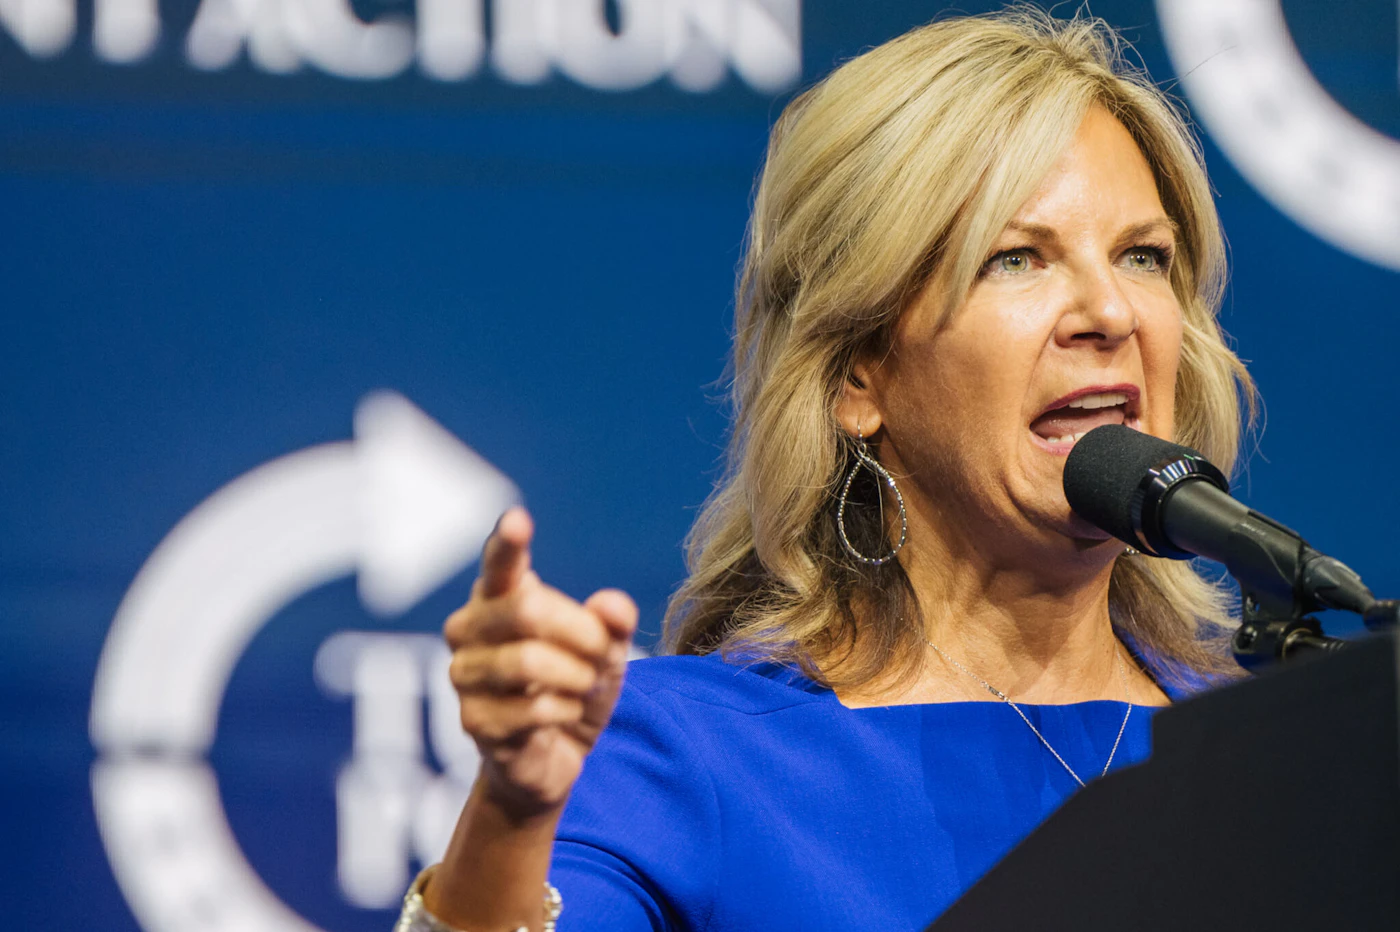 PHOENIX, ARIZONA - JULY 24: Arizona Chairwoman Kelli Ward speaks during the Rally To Protect Our Elections conference on July 24, 2021 in Phoenix, Arizona. The Phoenix-based political organization Turning Point Action hosted former President Donald Trump alongside GOP Arizona candidates who have begun candidacy for government elected roles. (Photo by Brandon Bell/Getty Images)